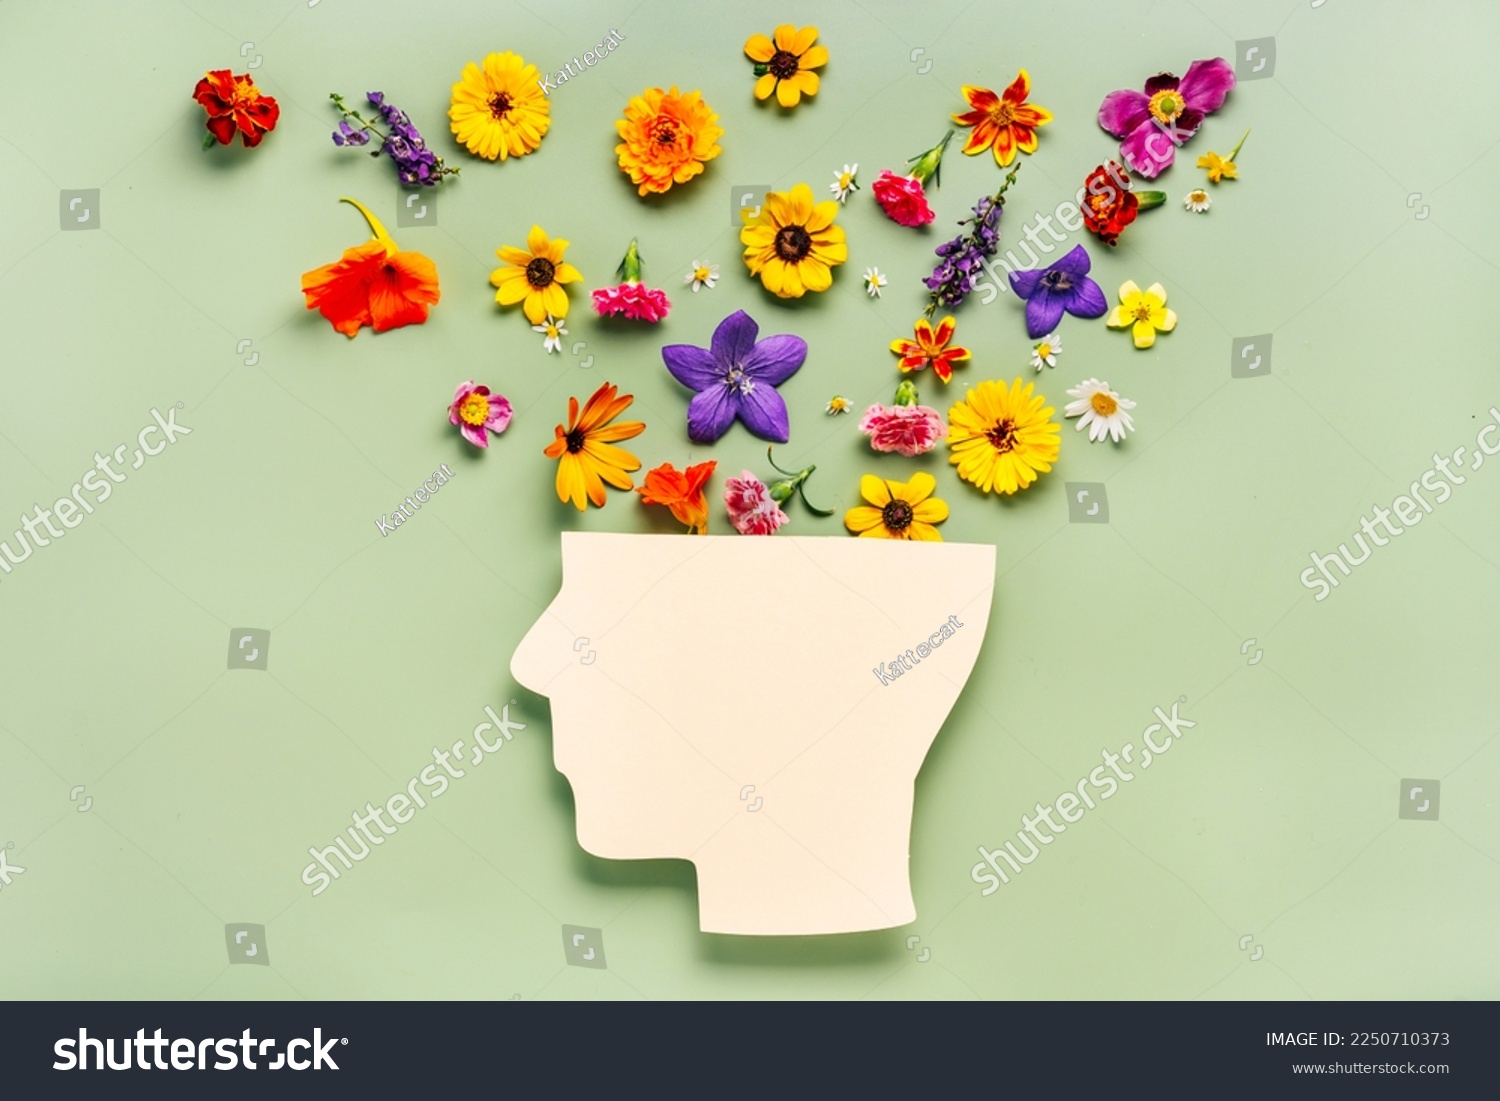 Human head symbol and flowers on blue background. World mental health day concept #2250710373